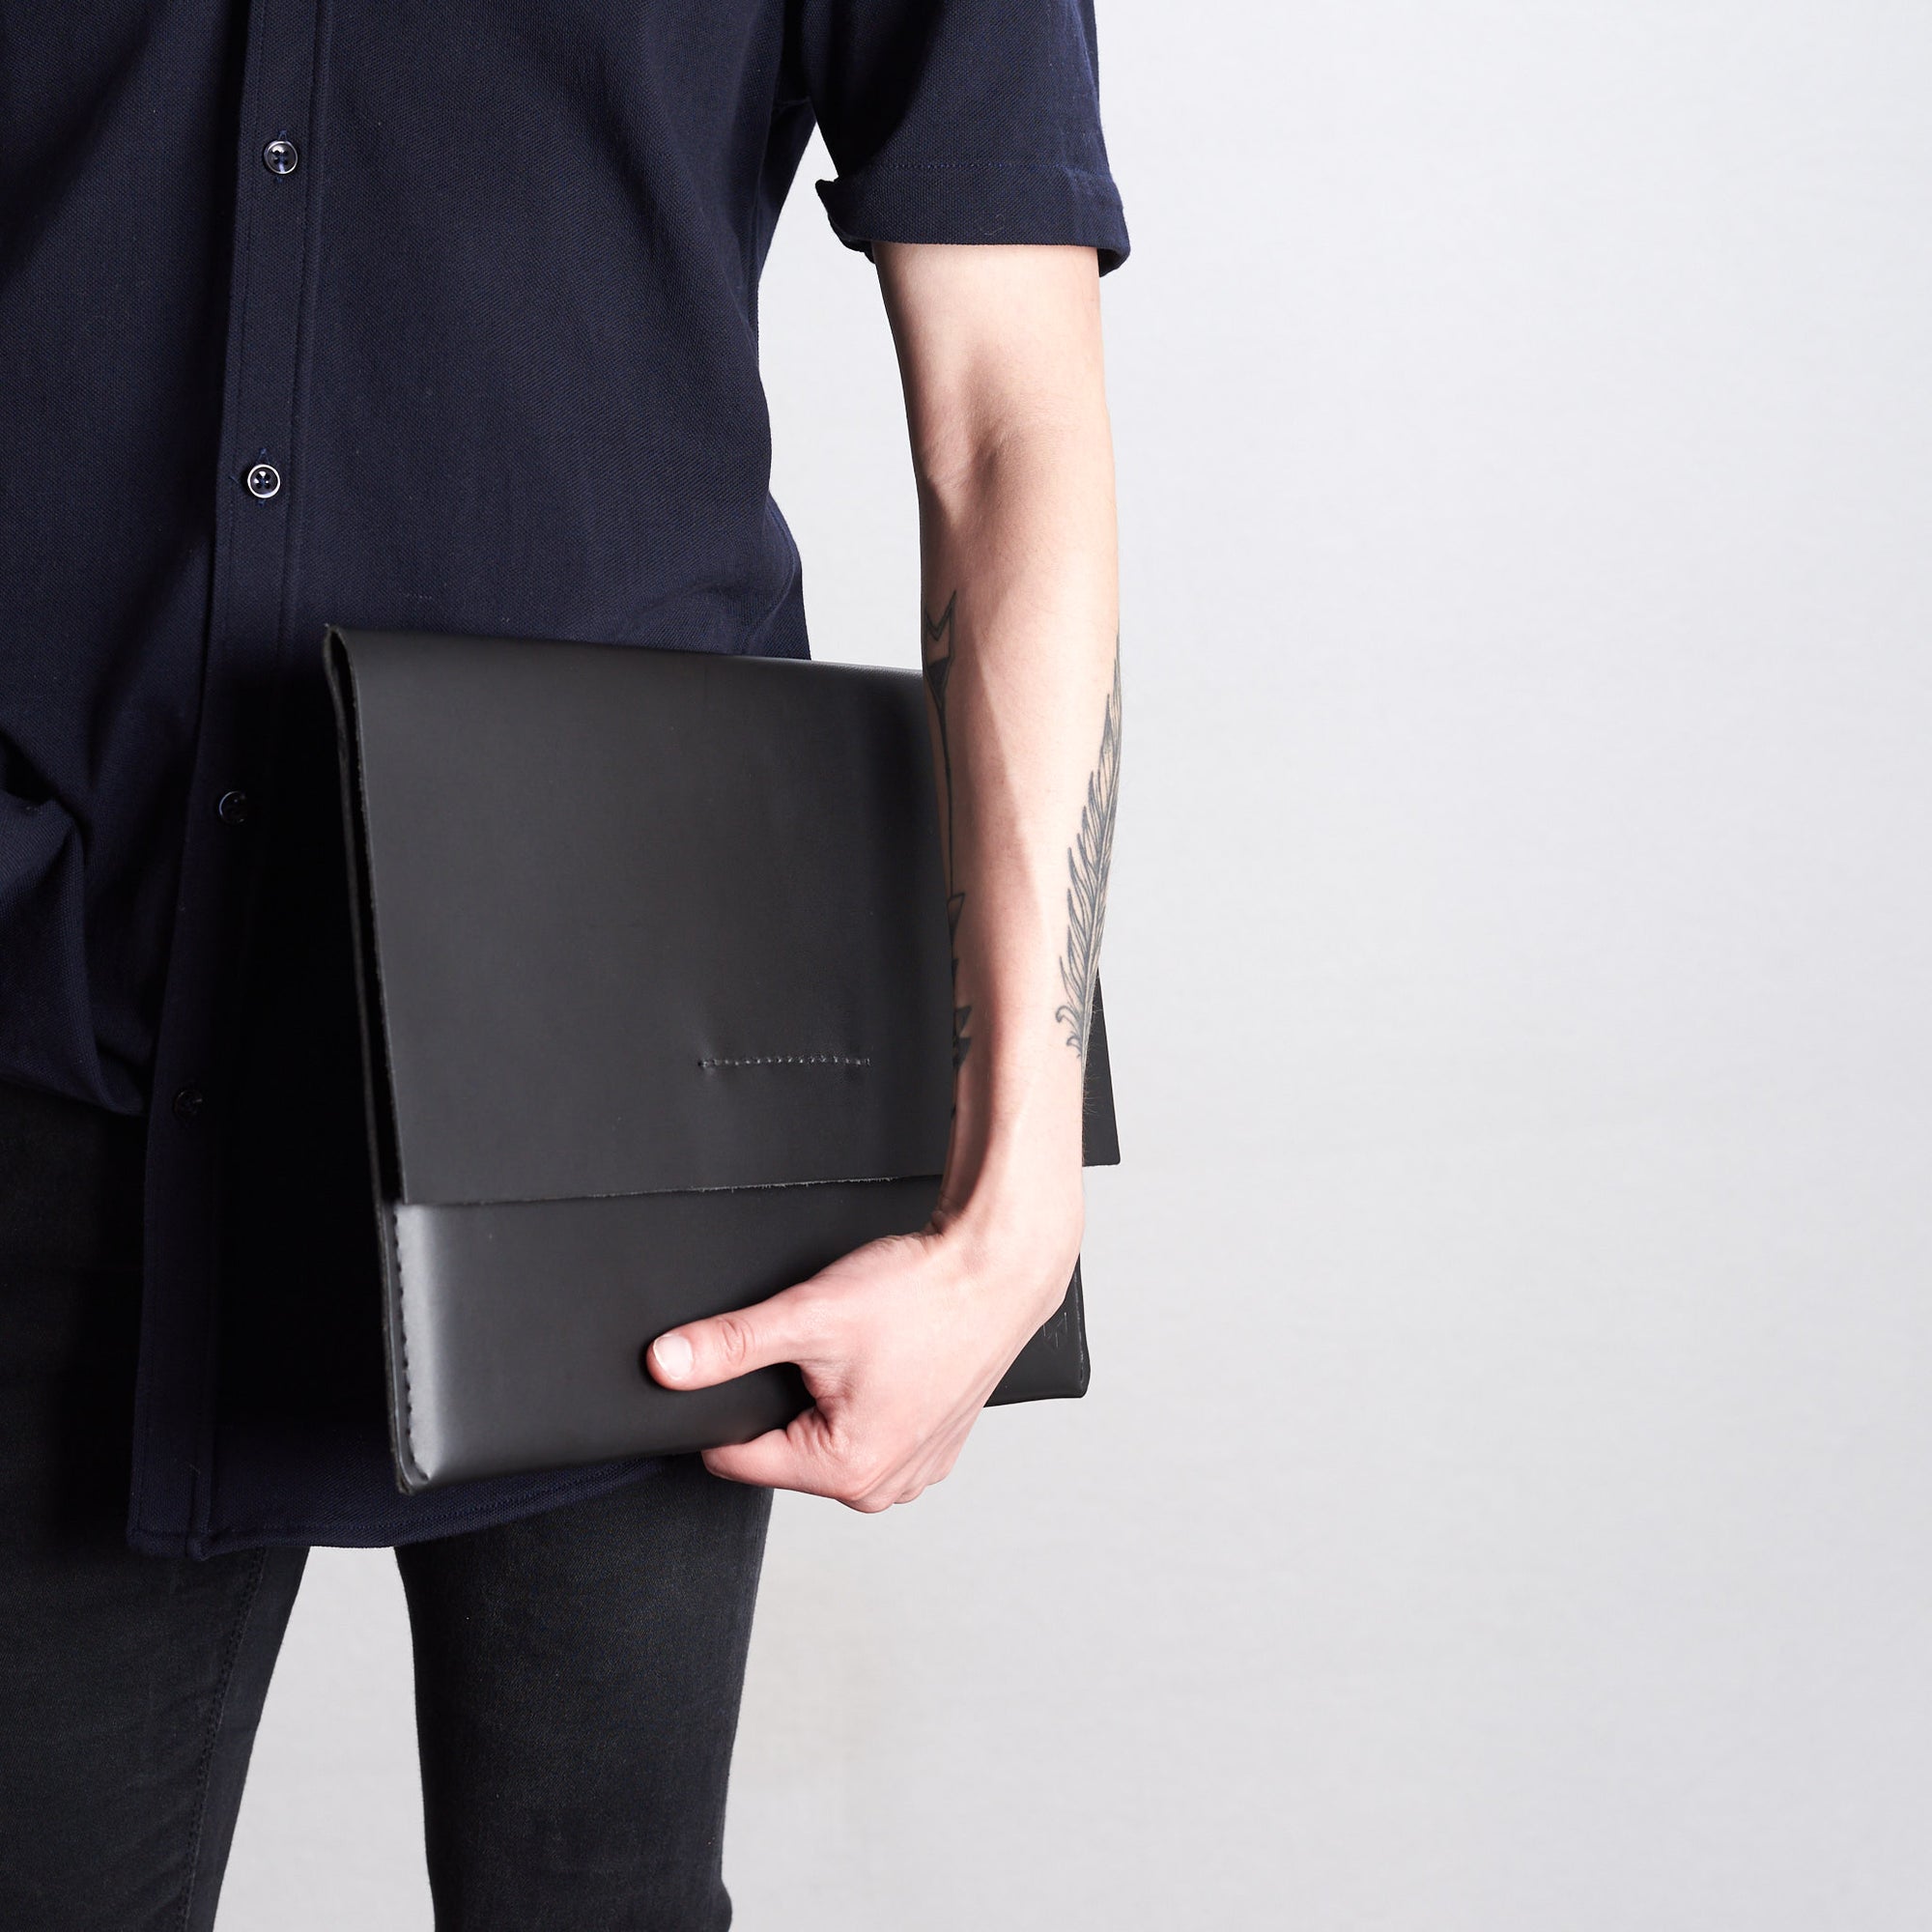 Style side model view of case. Black draftsman 1 case by Capra Leather. Google pixel book sleeve.